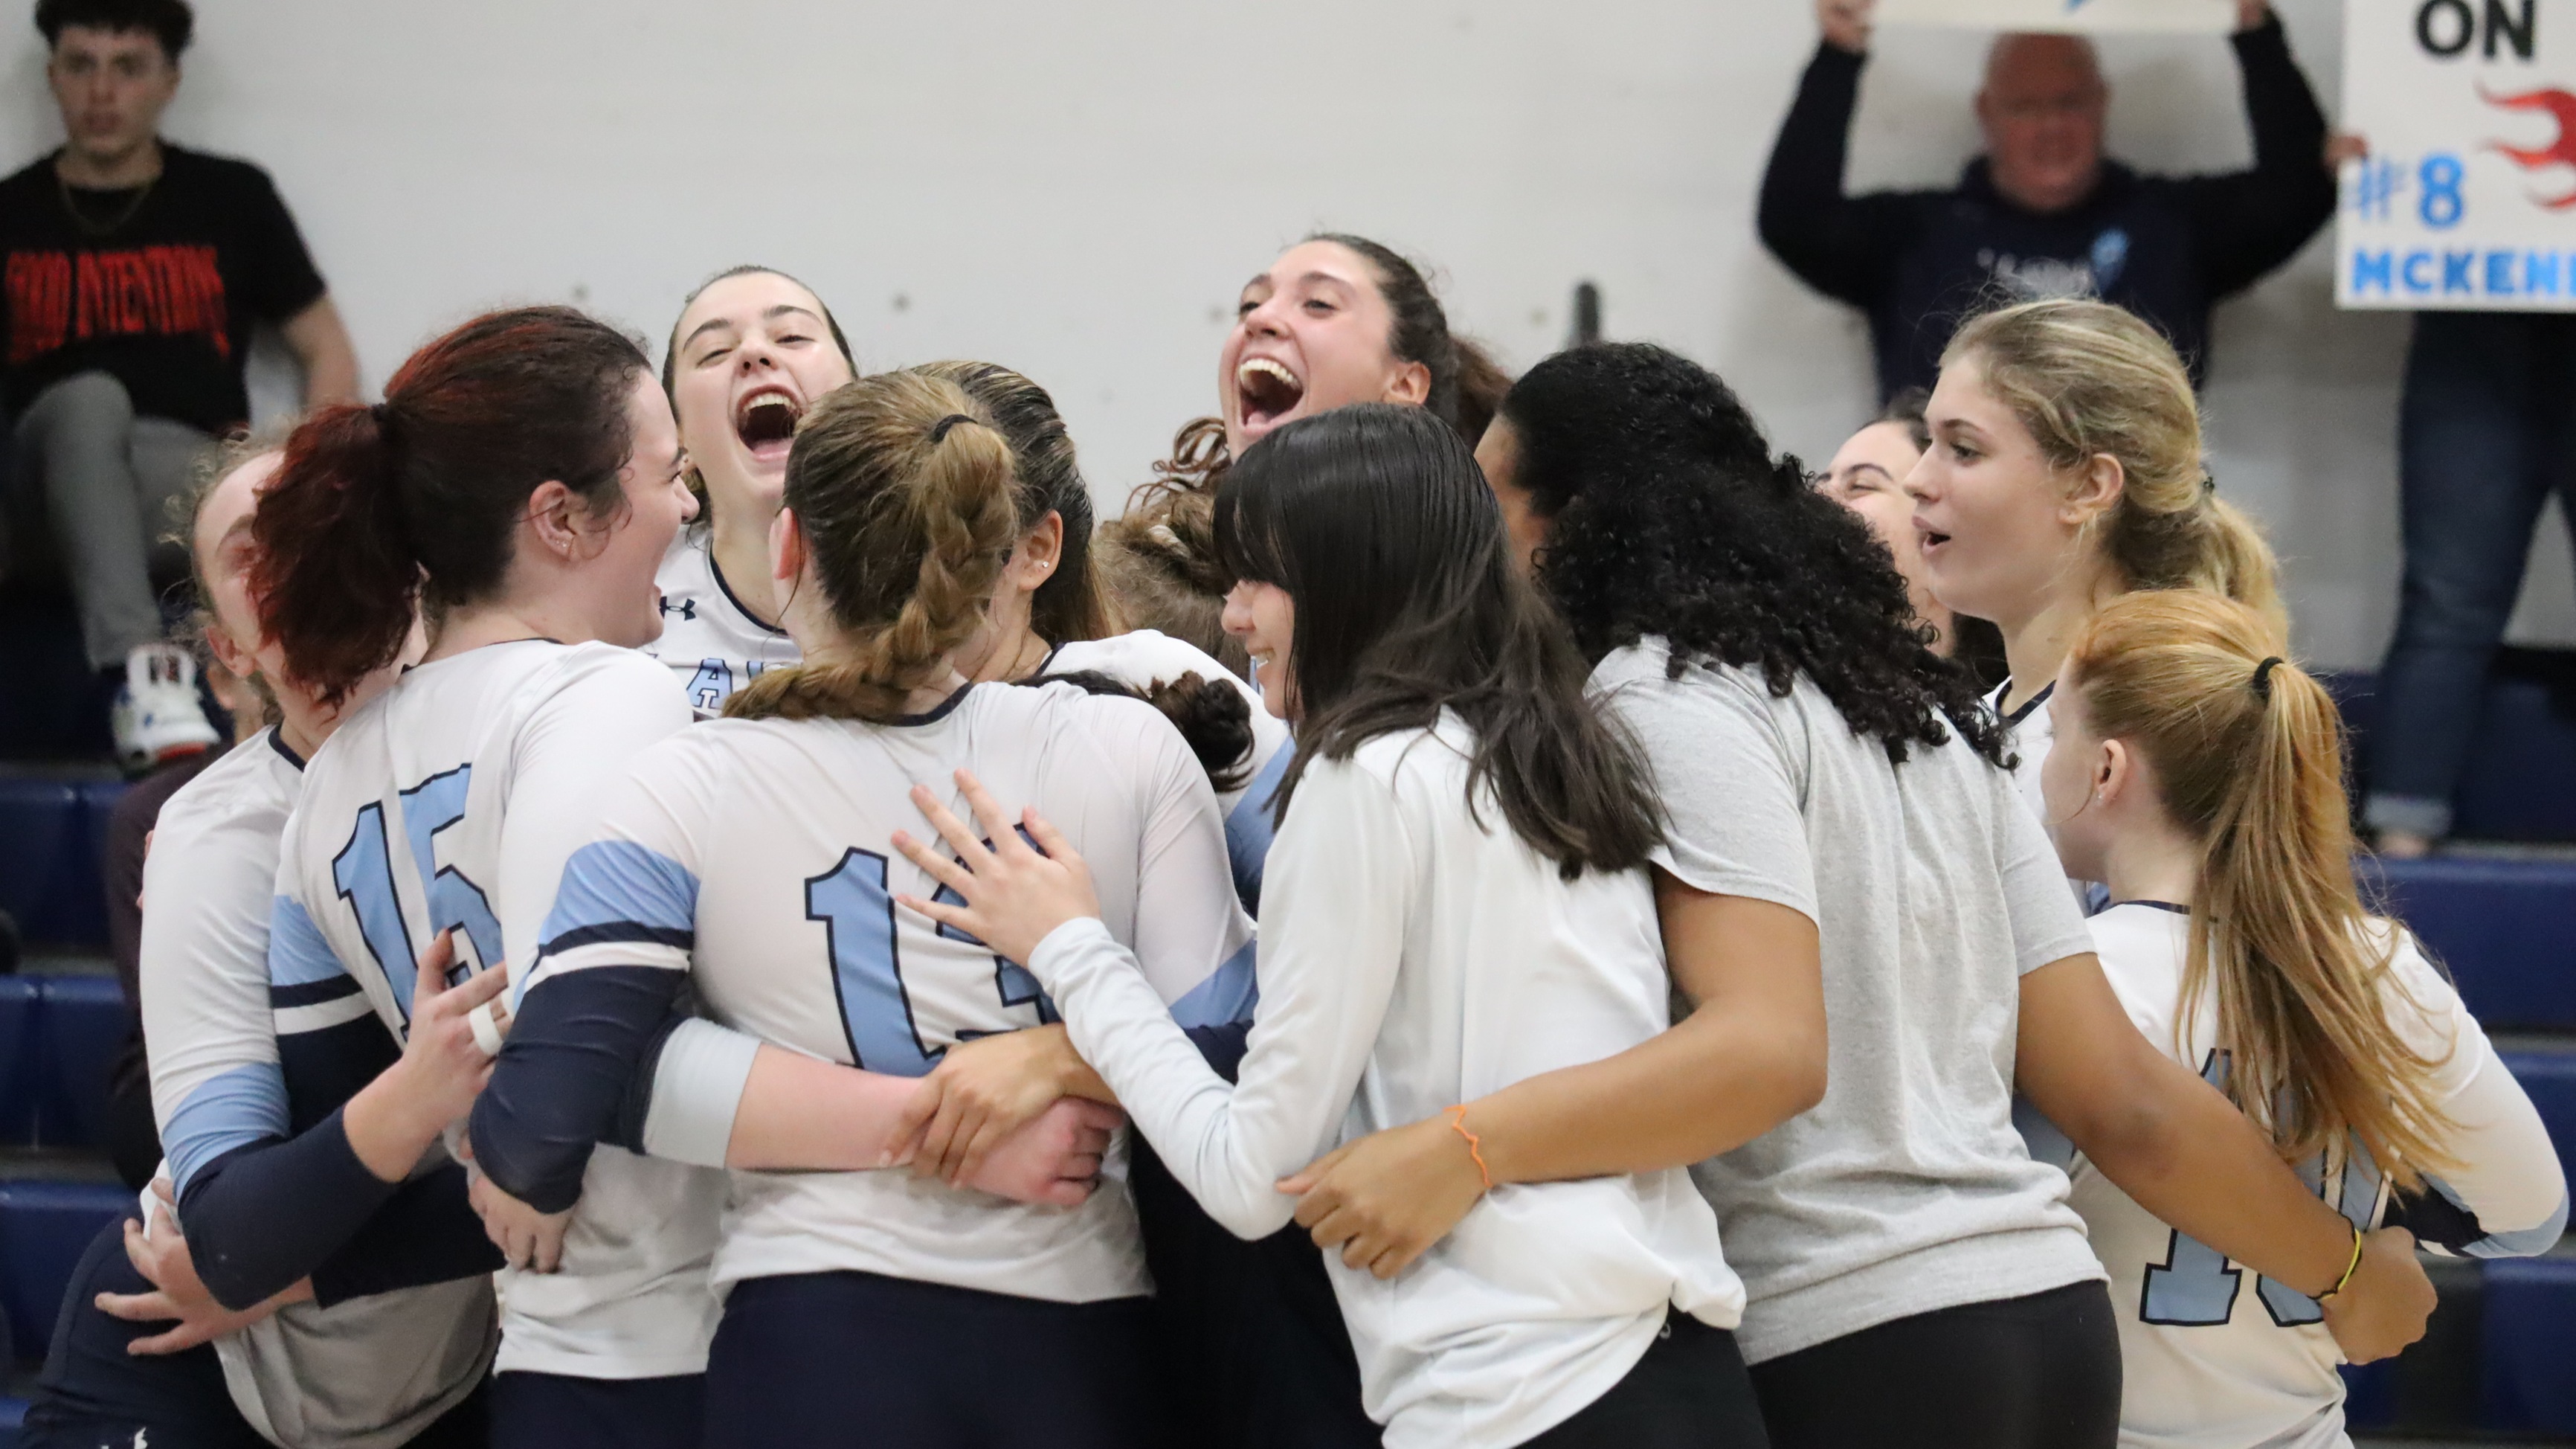 WVB: Lasers sweep Elms; will face Johnson and Wales in GNAC Semi's